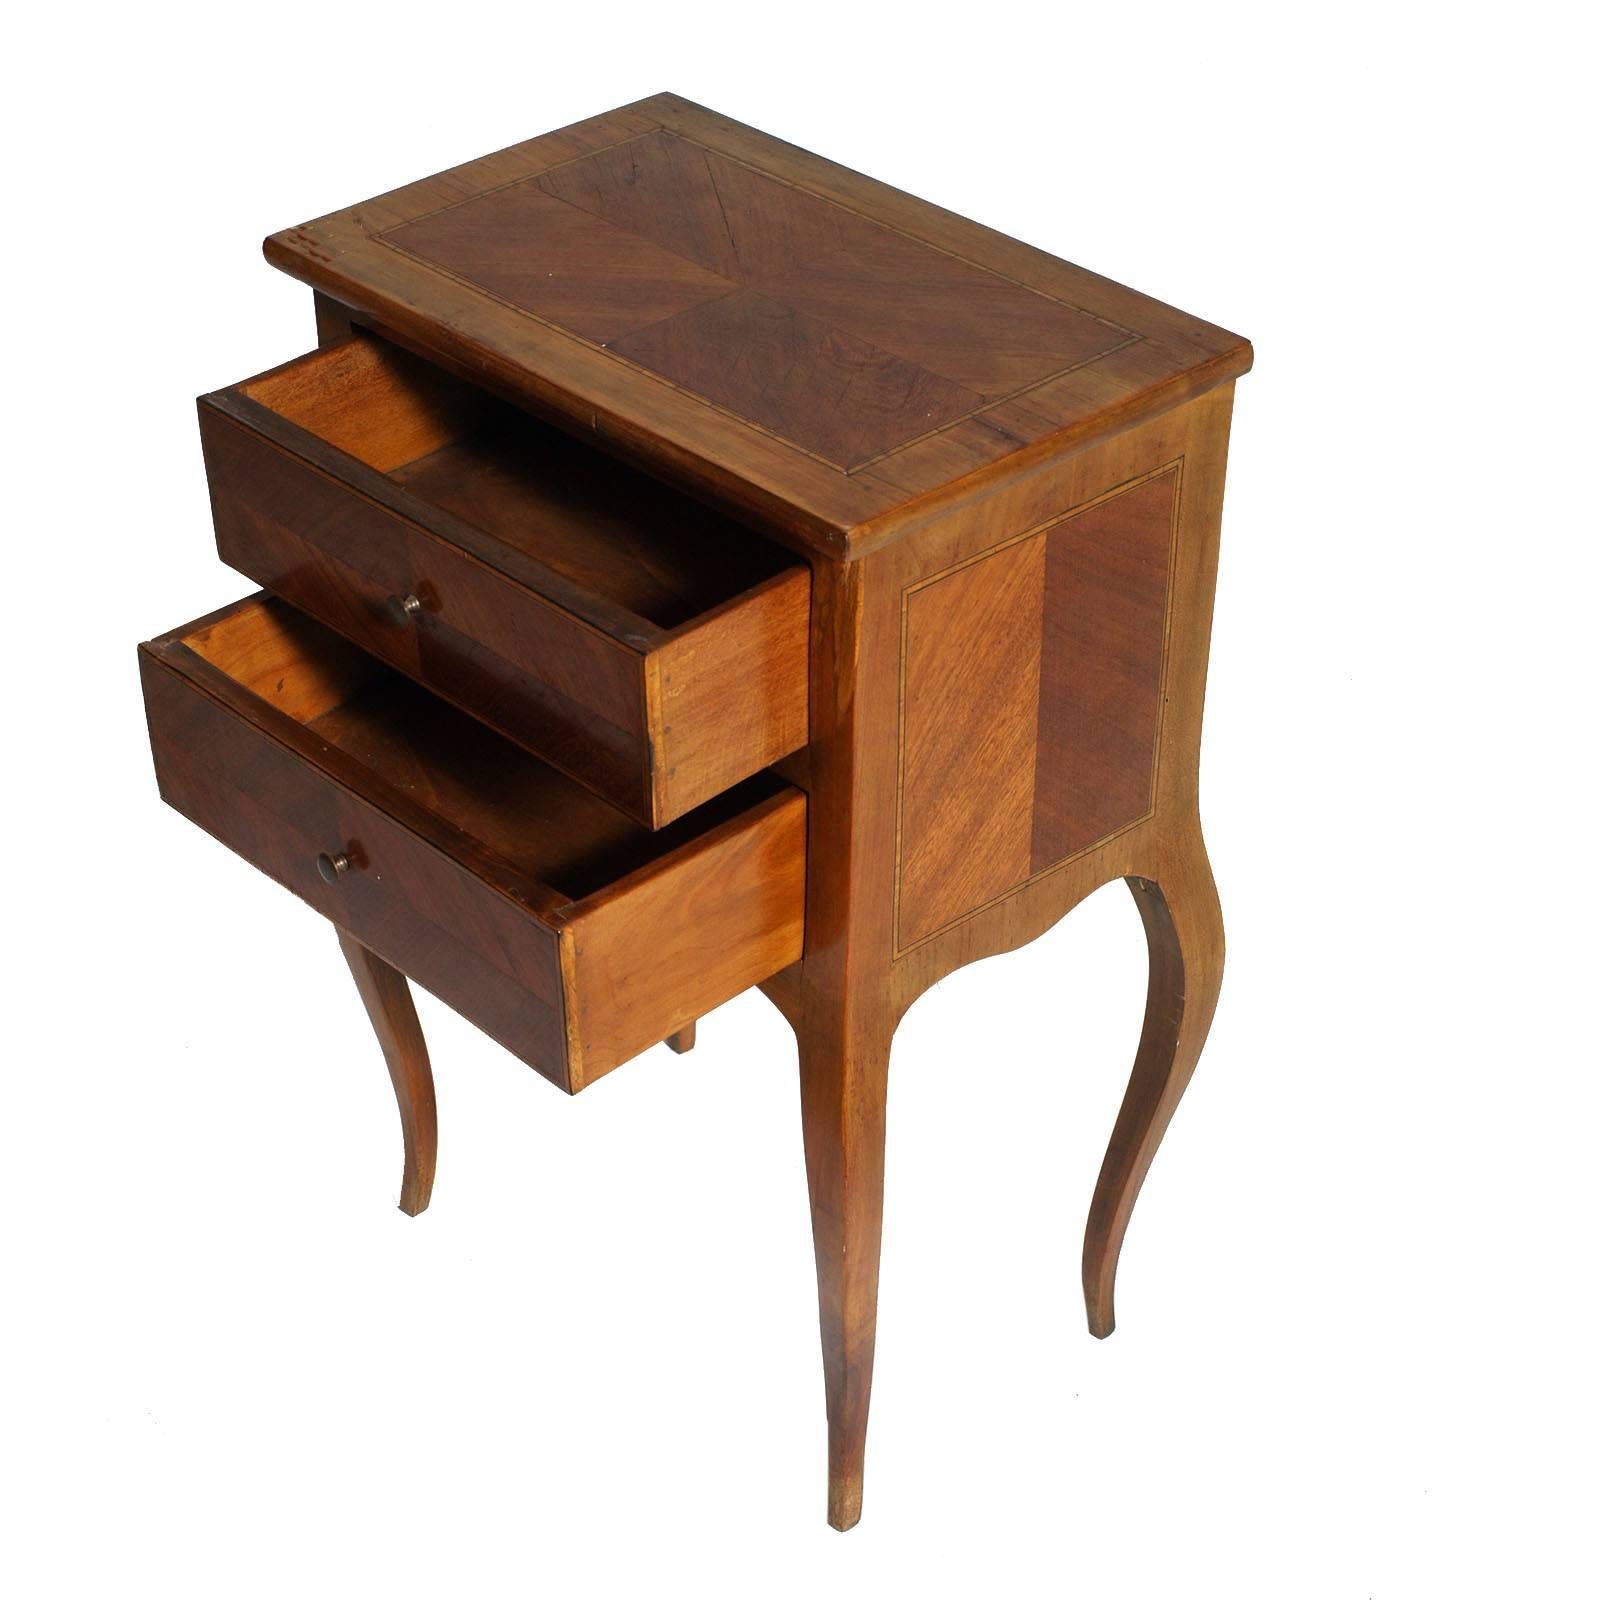 Louis XV 1920s little side cabinet or nightstand blond walnut and walnut inlay maple, restored and polished to wax

Measure cm: H 60 x W 40 x D 26.